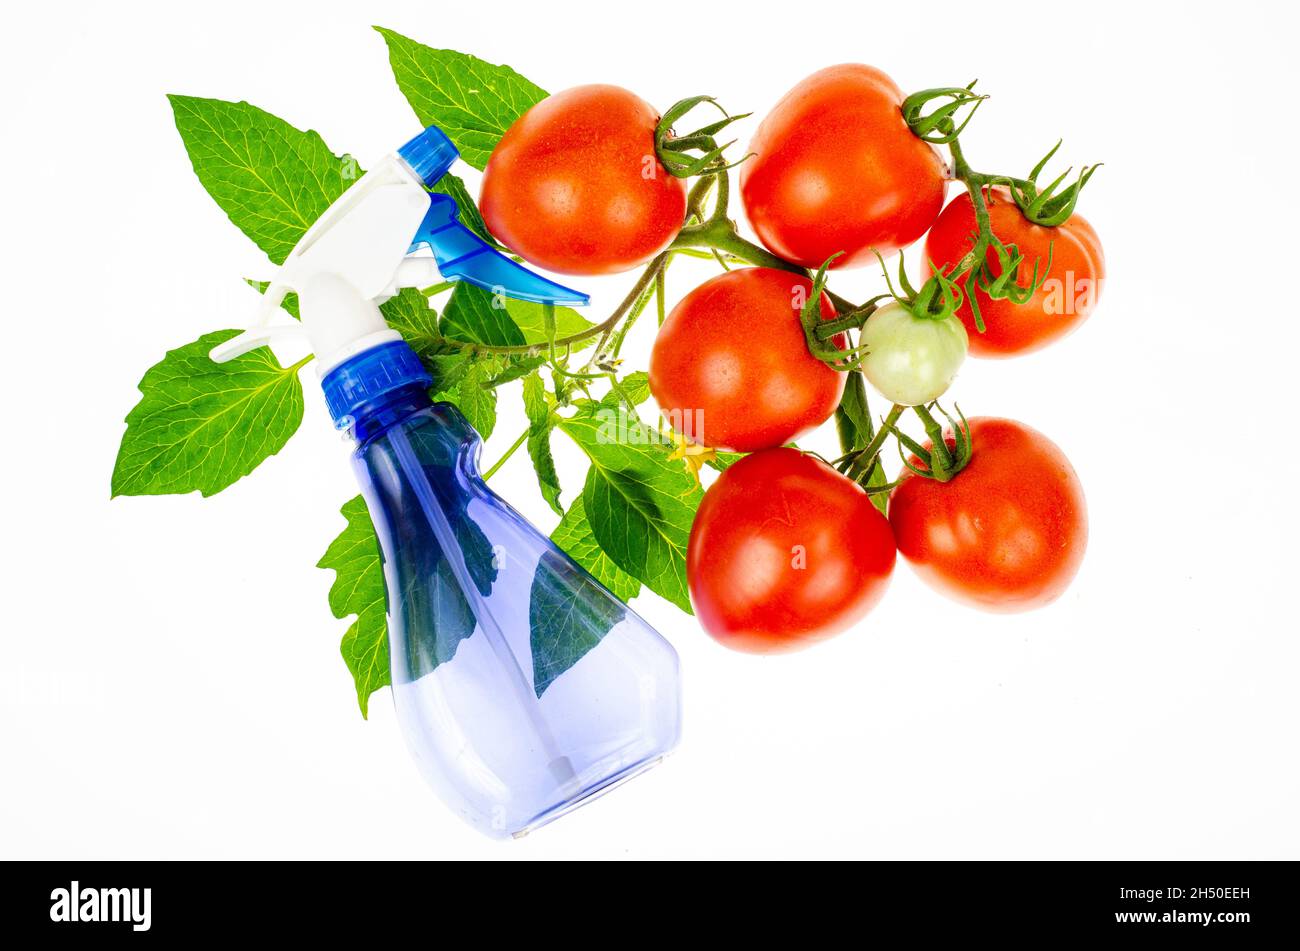 ?oncept of spraying tomatoes with pesticides against pests and diseases. Studio Photo Stock Photo